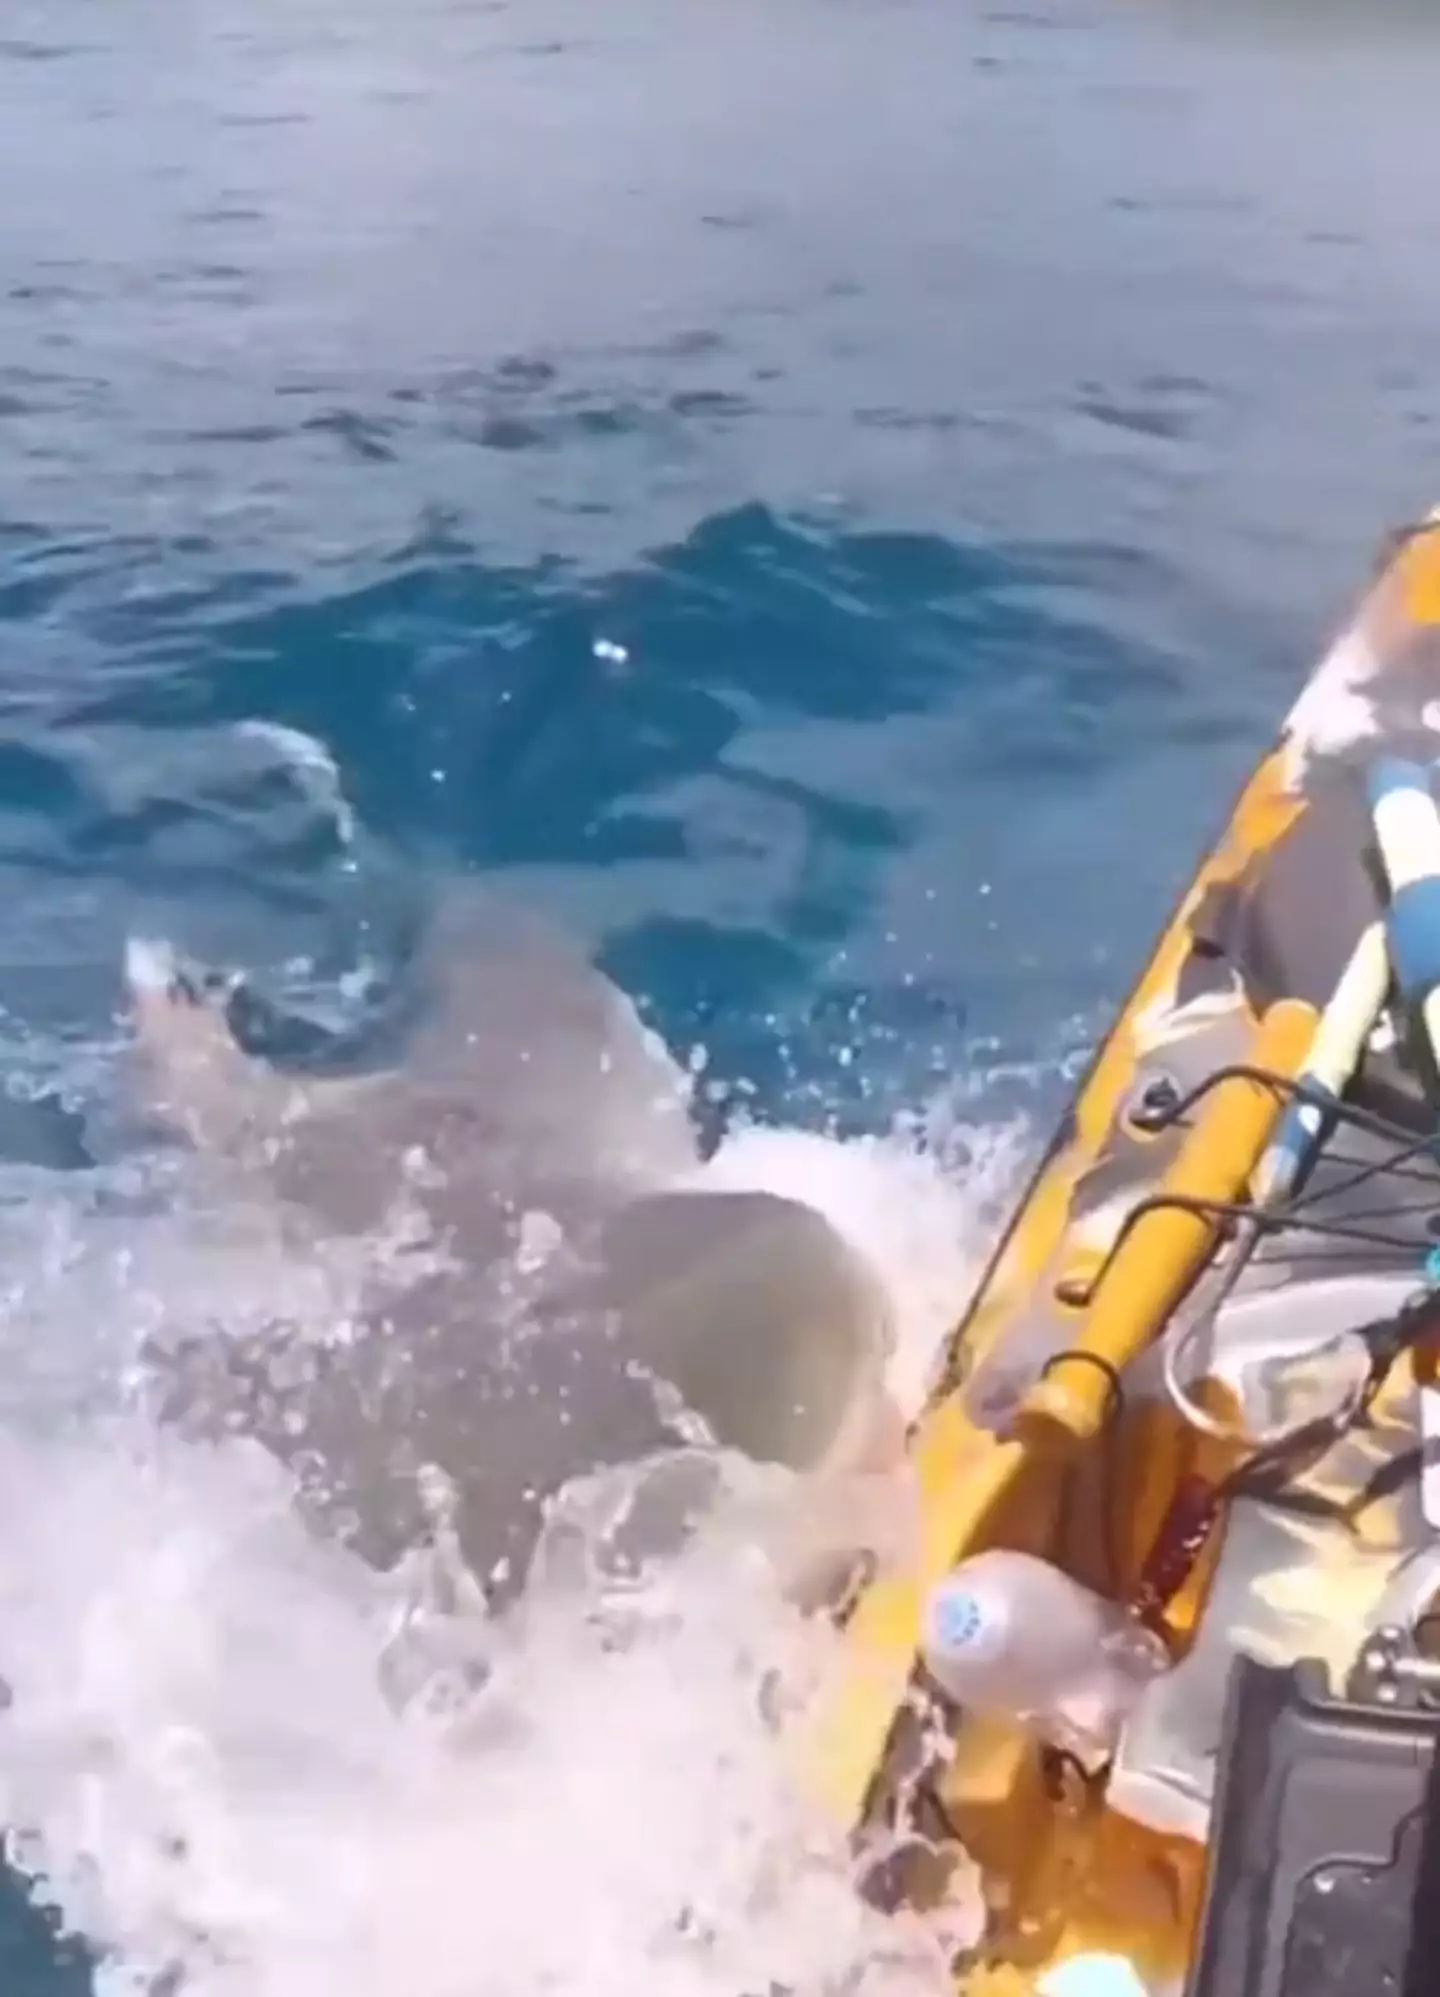 The moment that the shark launched itself at the kayak.